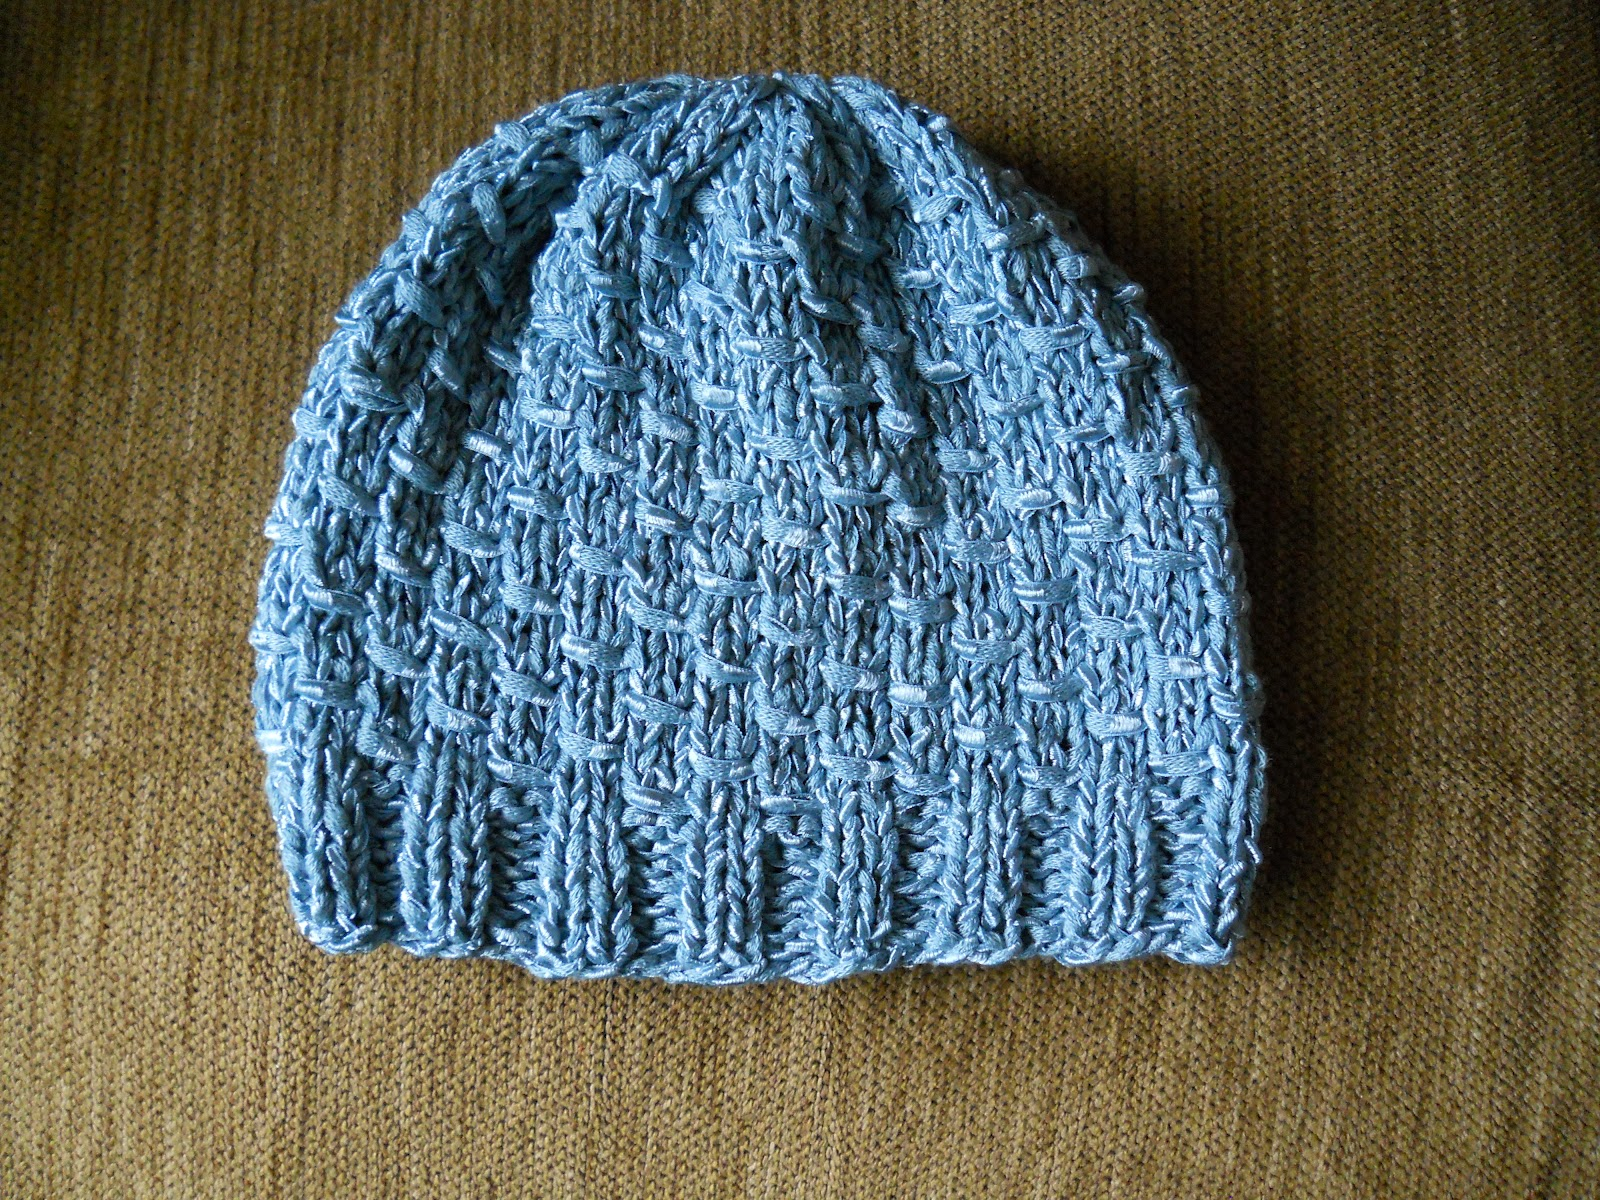 Knit Chemo Cap Pattern Knitting With Schnapps Introducing The Armor Of Hope Chemo Cap